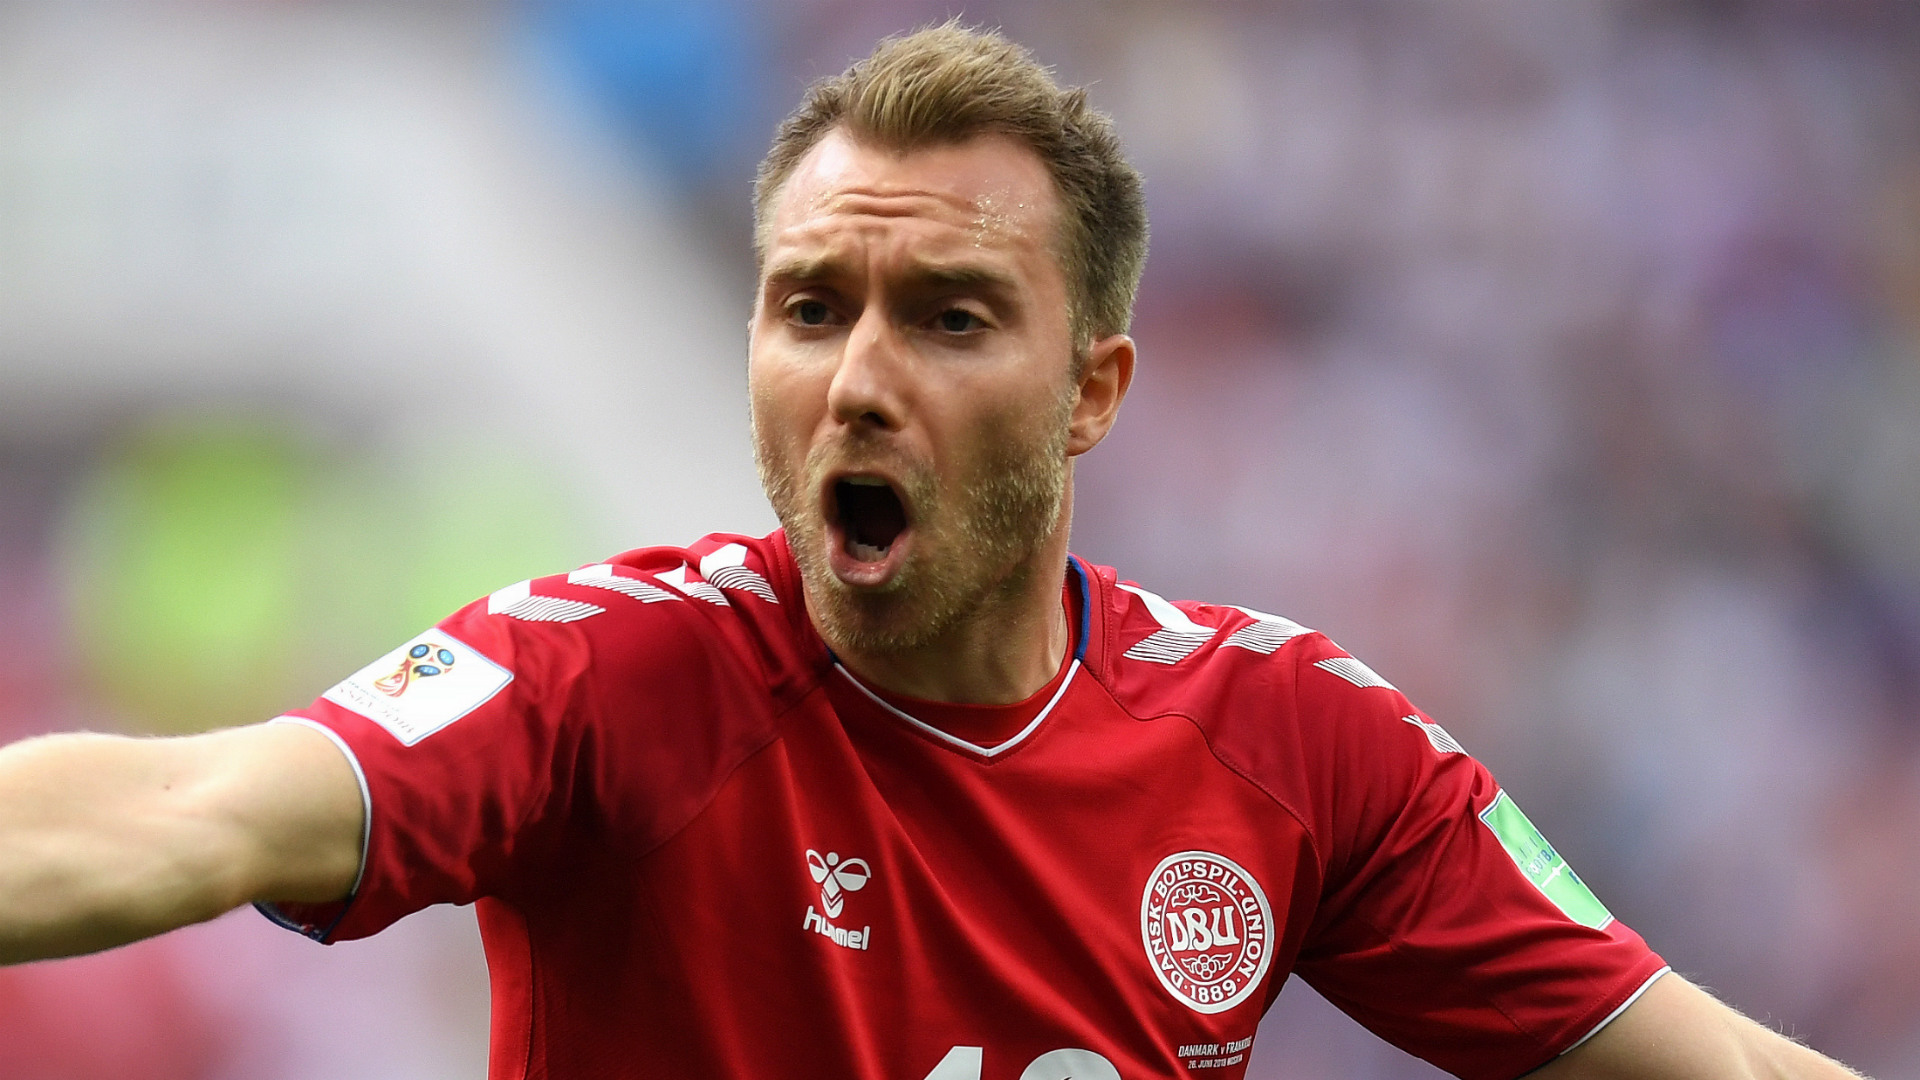 Christian Eriksen will be claim maximum points against Finland